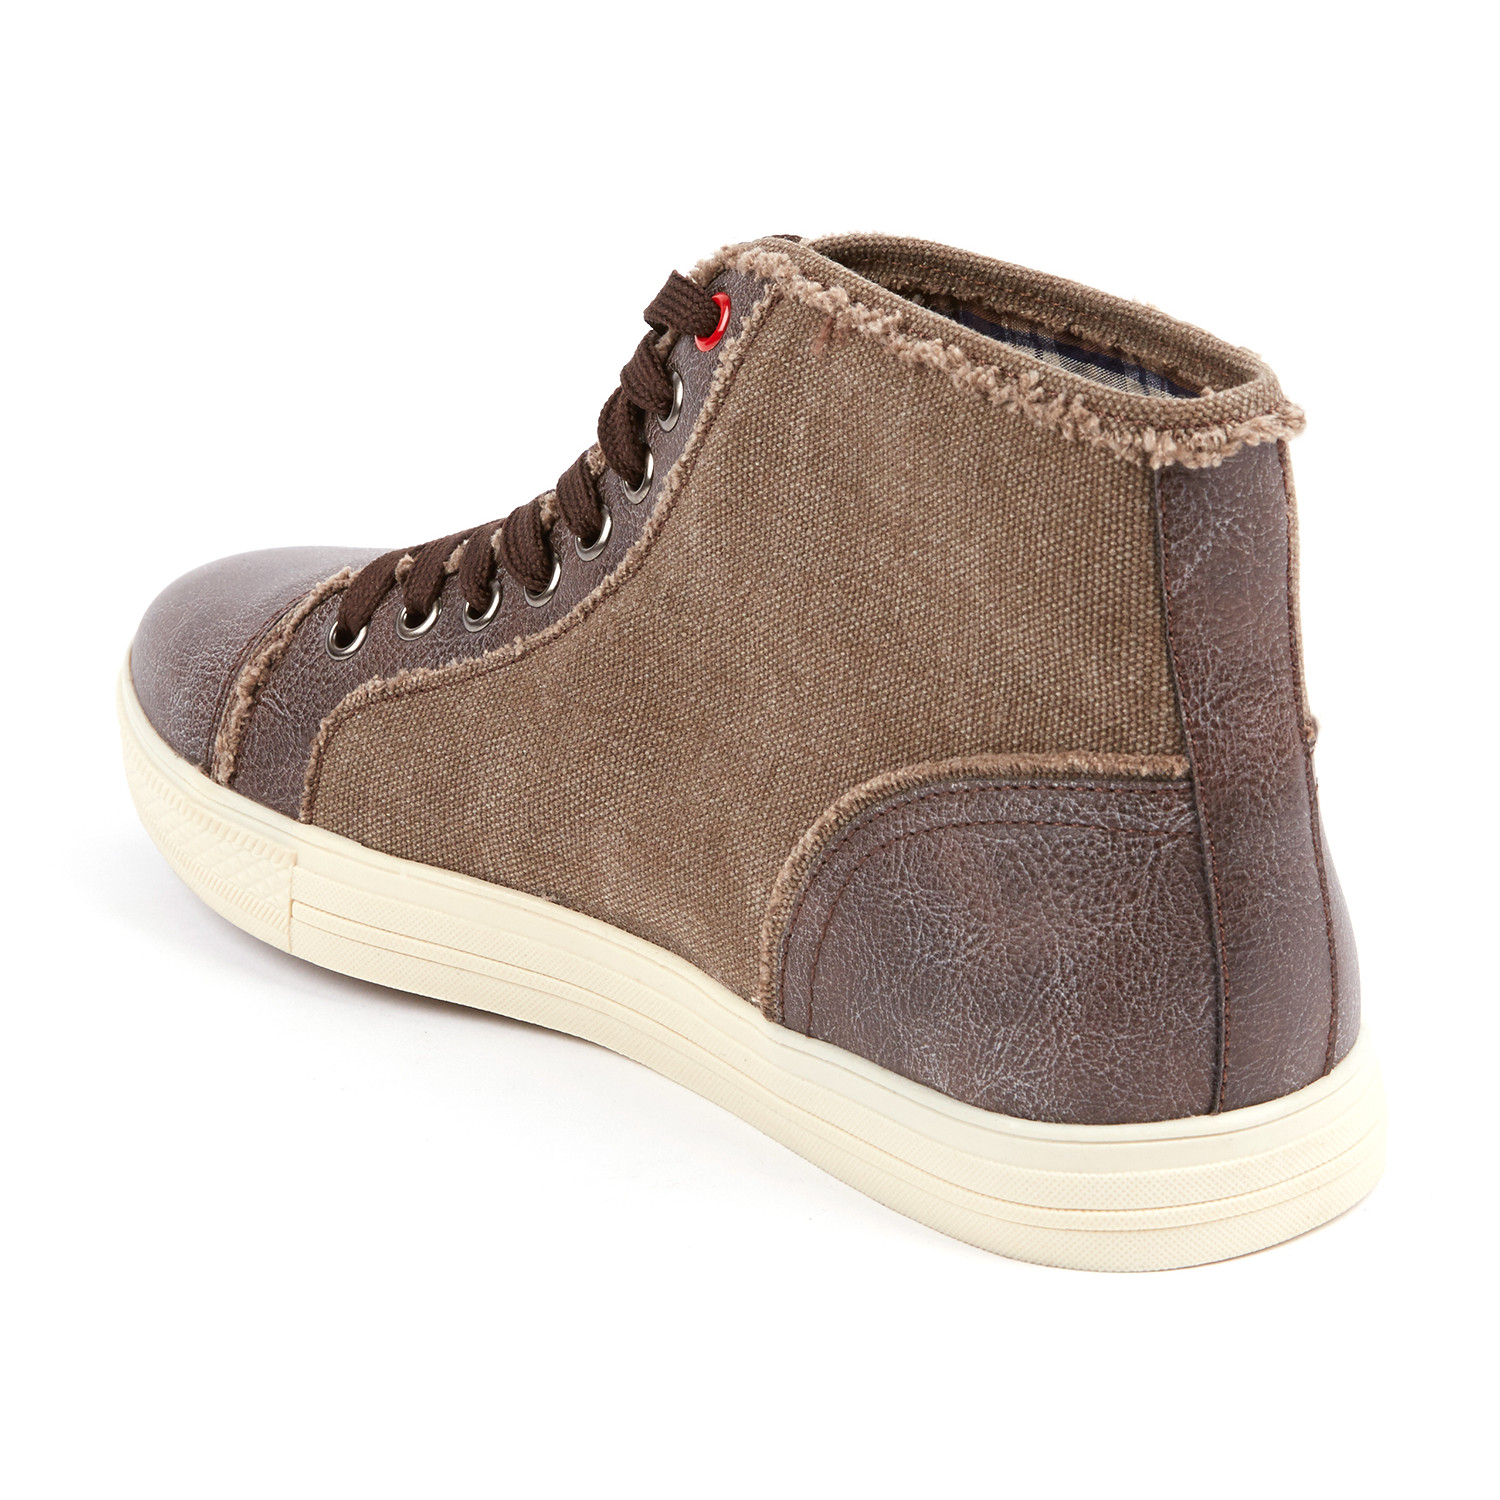 Denny Cap Toe Lace Up Sneakers / Brown (US: 7) - Union Bay Shoes ...